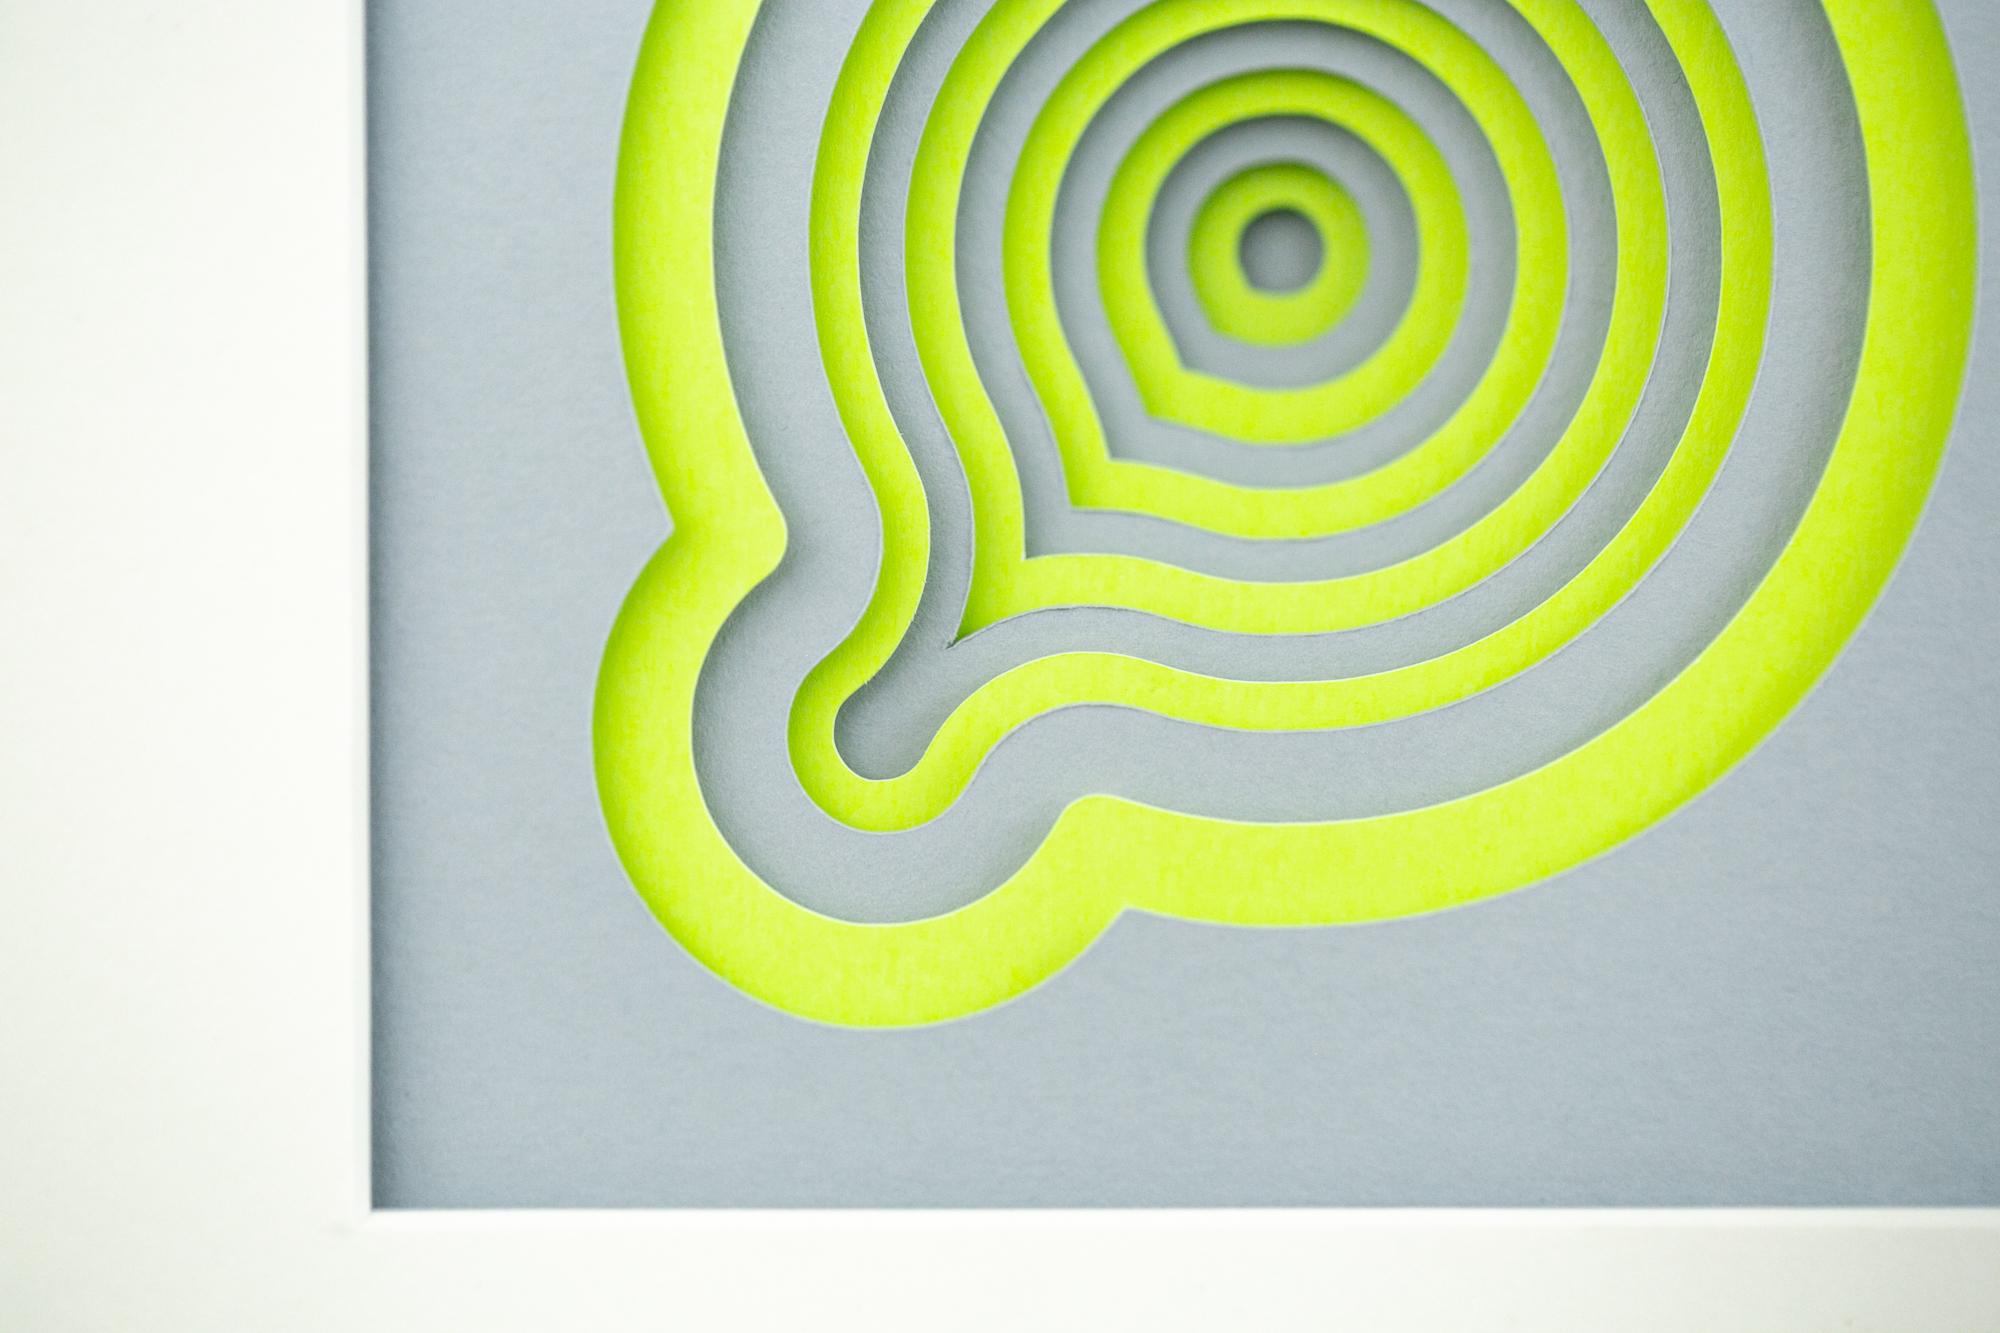 This lime green and grey abstract paper artwork titled 